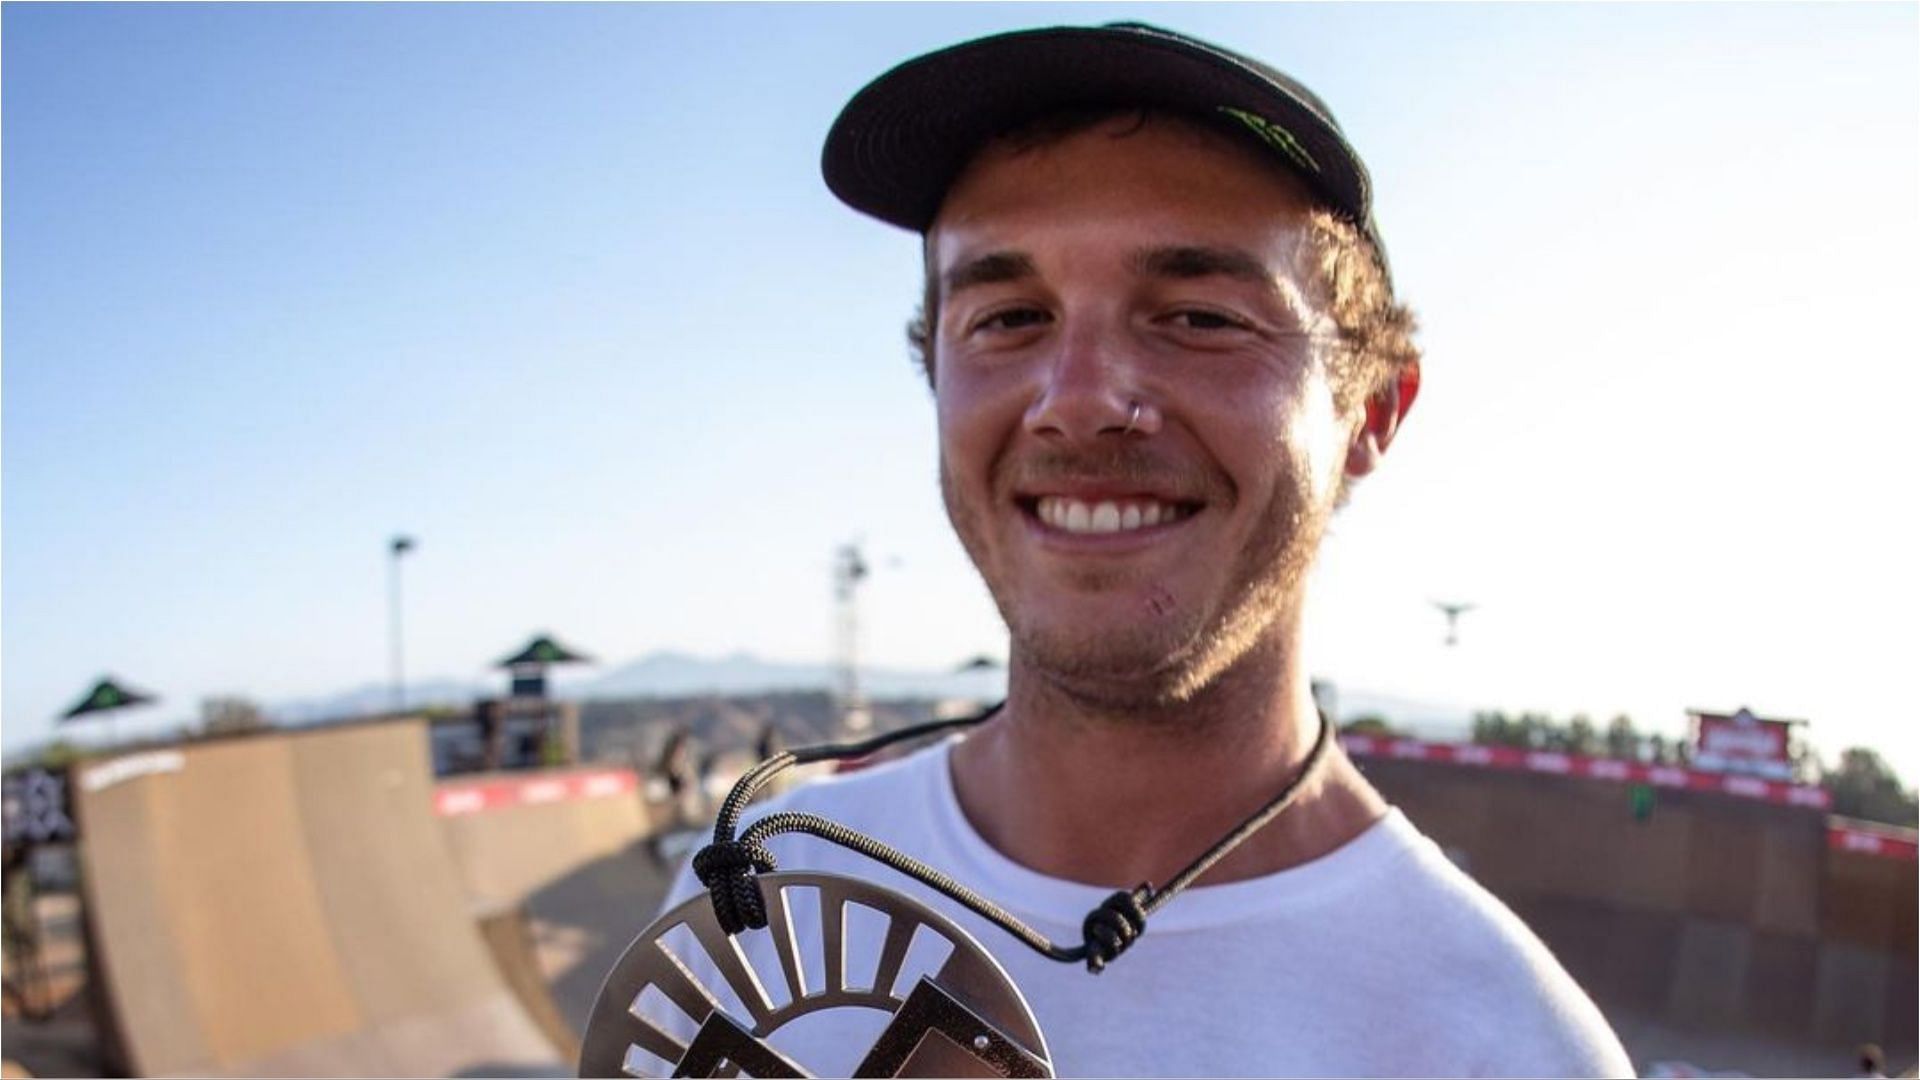 Pat Casey is speculated to have died at an accident at an X Games freestyle motocross track (Image via patcaseybmx/Instagram)